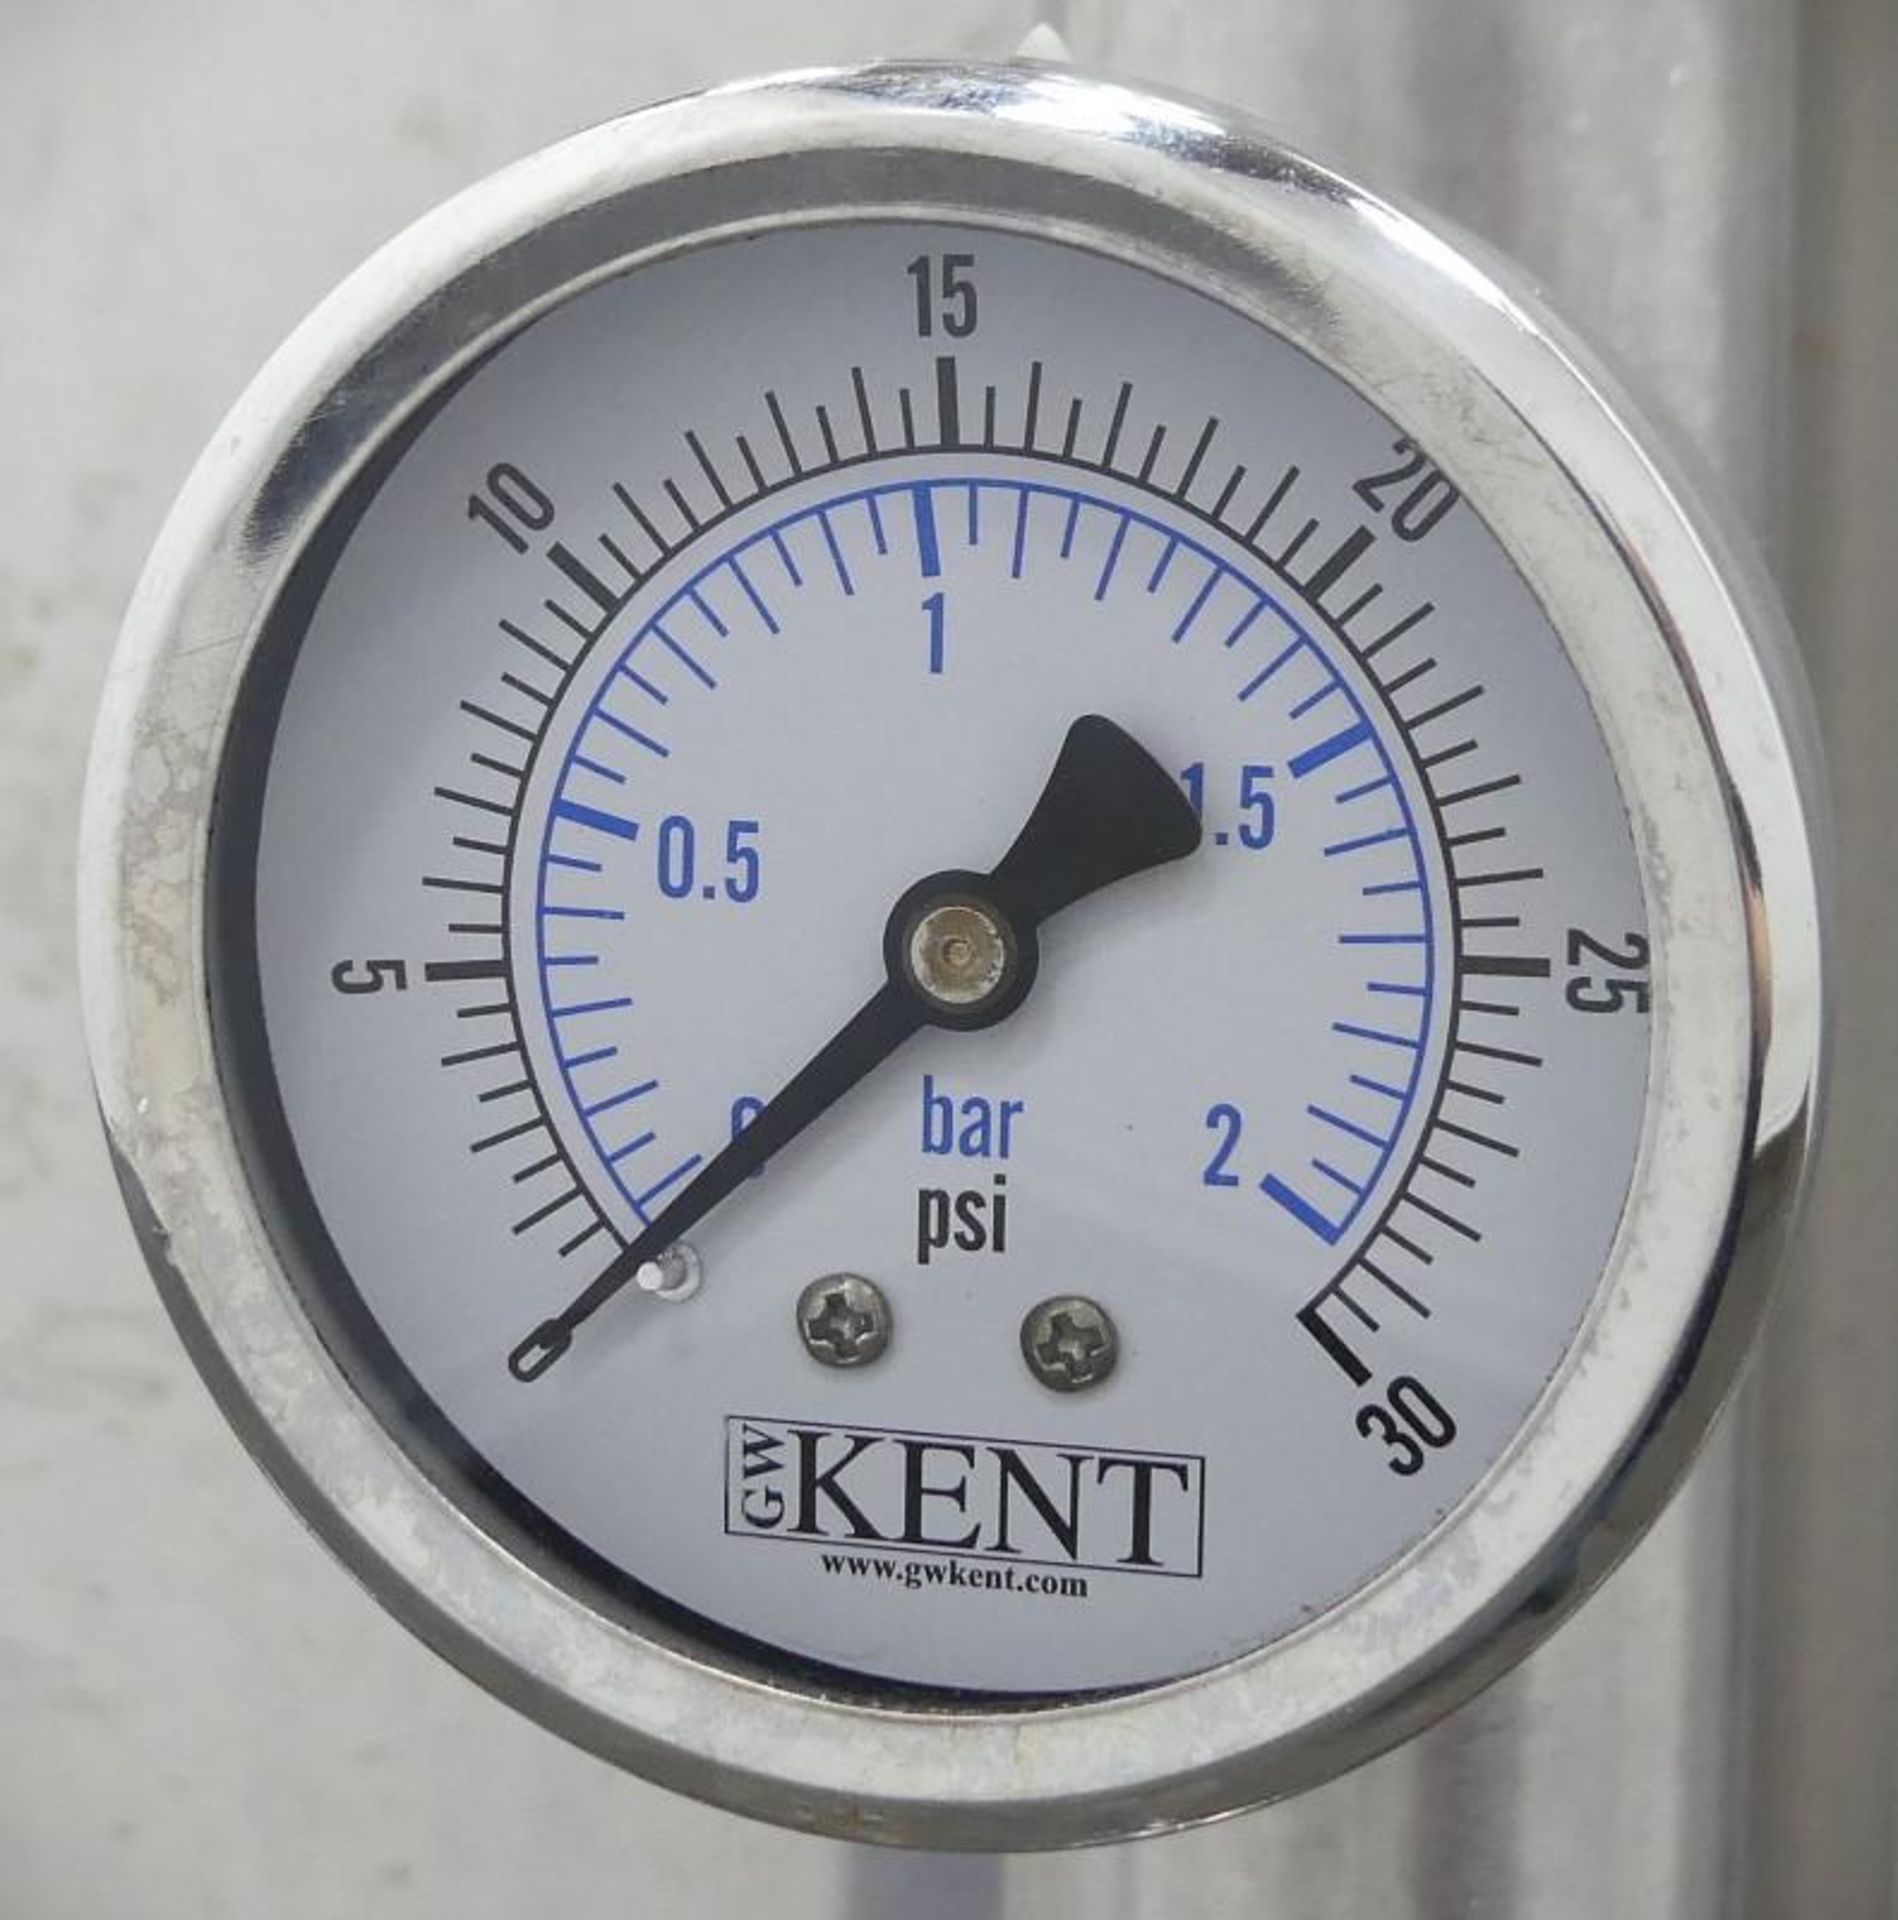 2015 Kent GW Stainless Steel Jacketed Brite Tank - Image 8 of 16